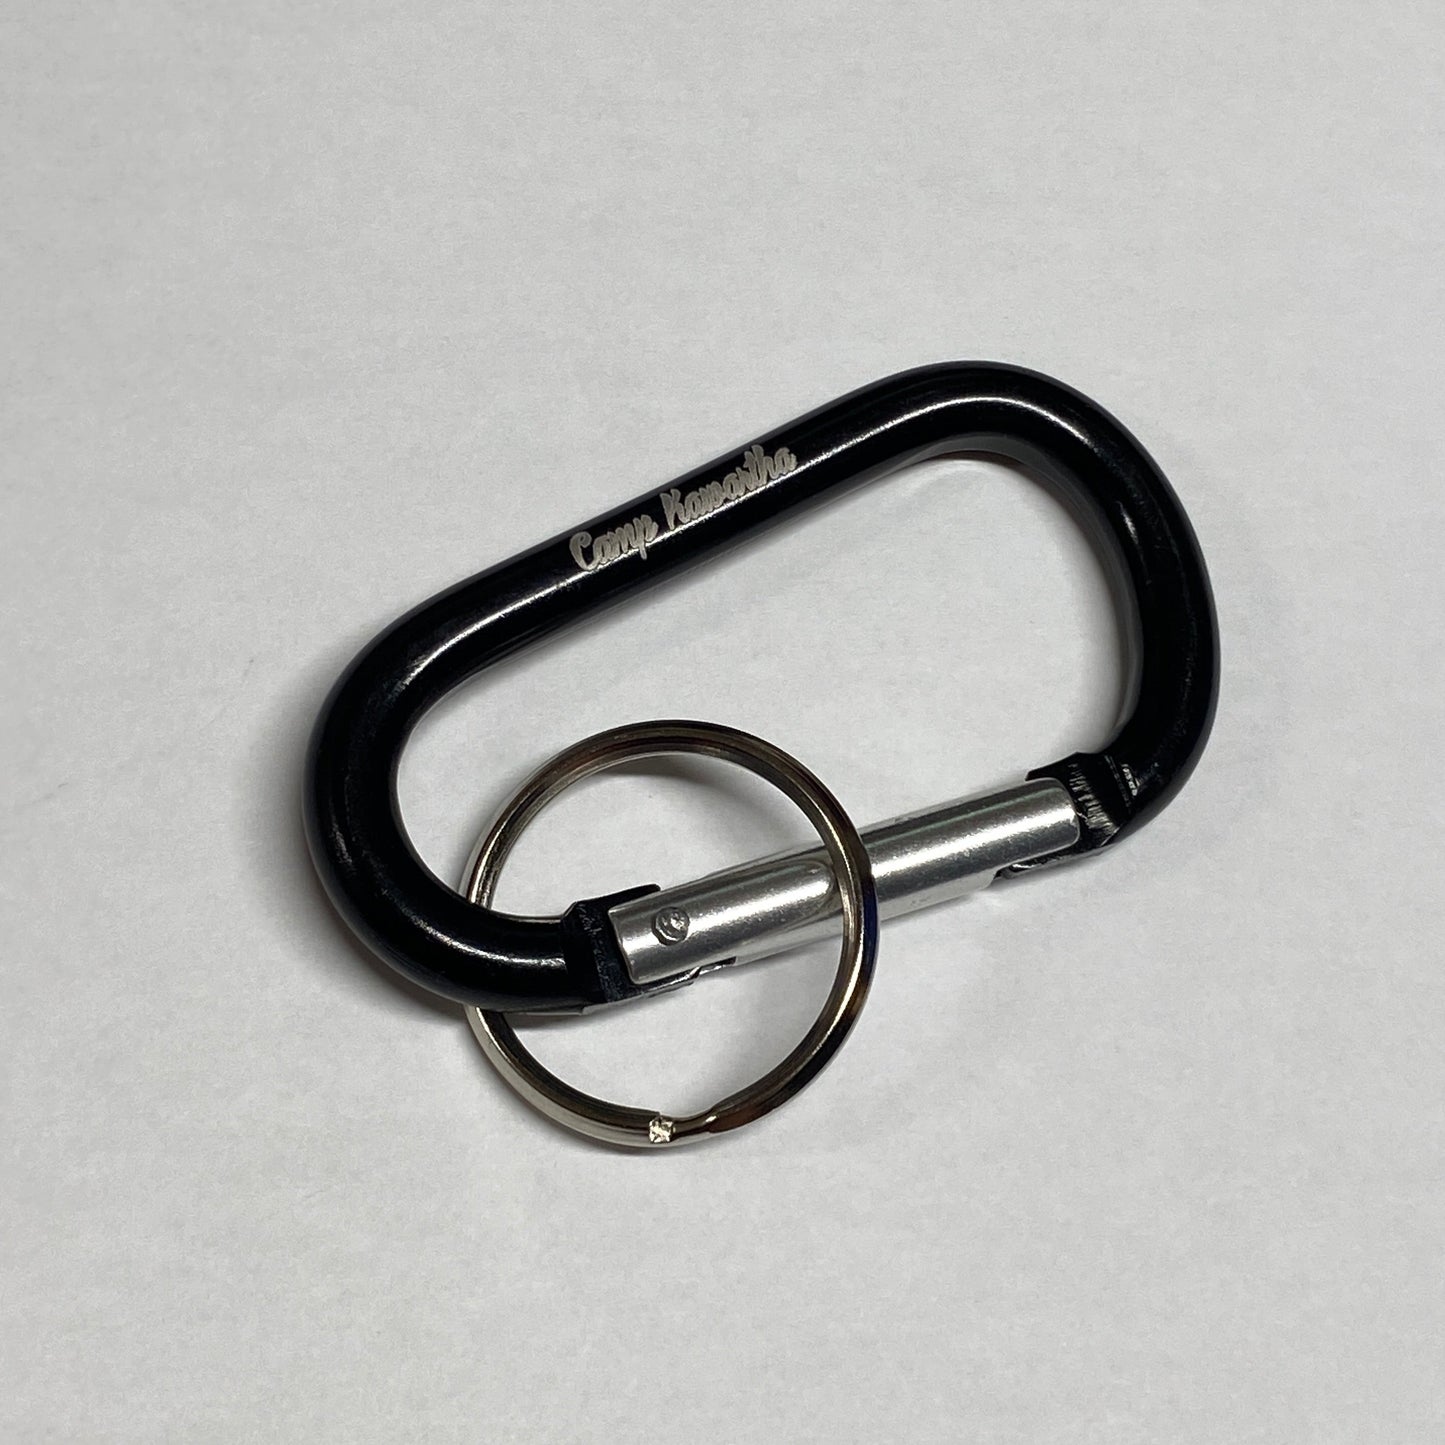 Carabiner with Keyring